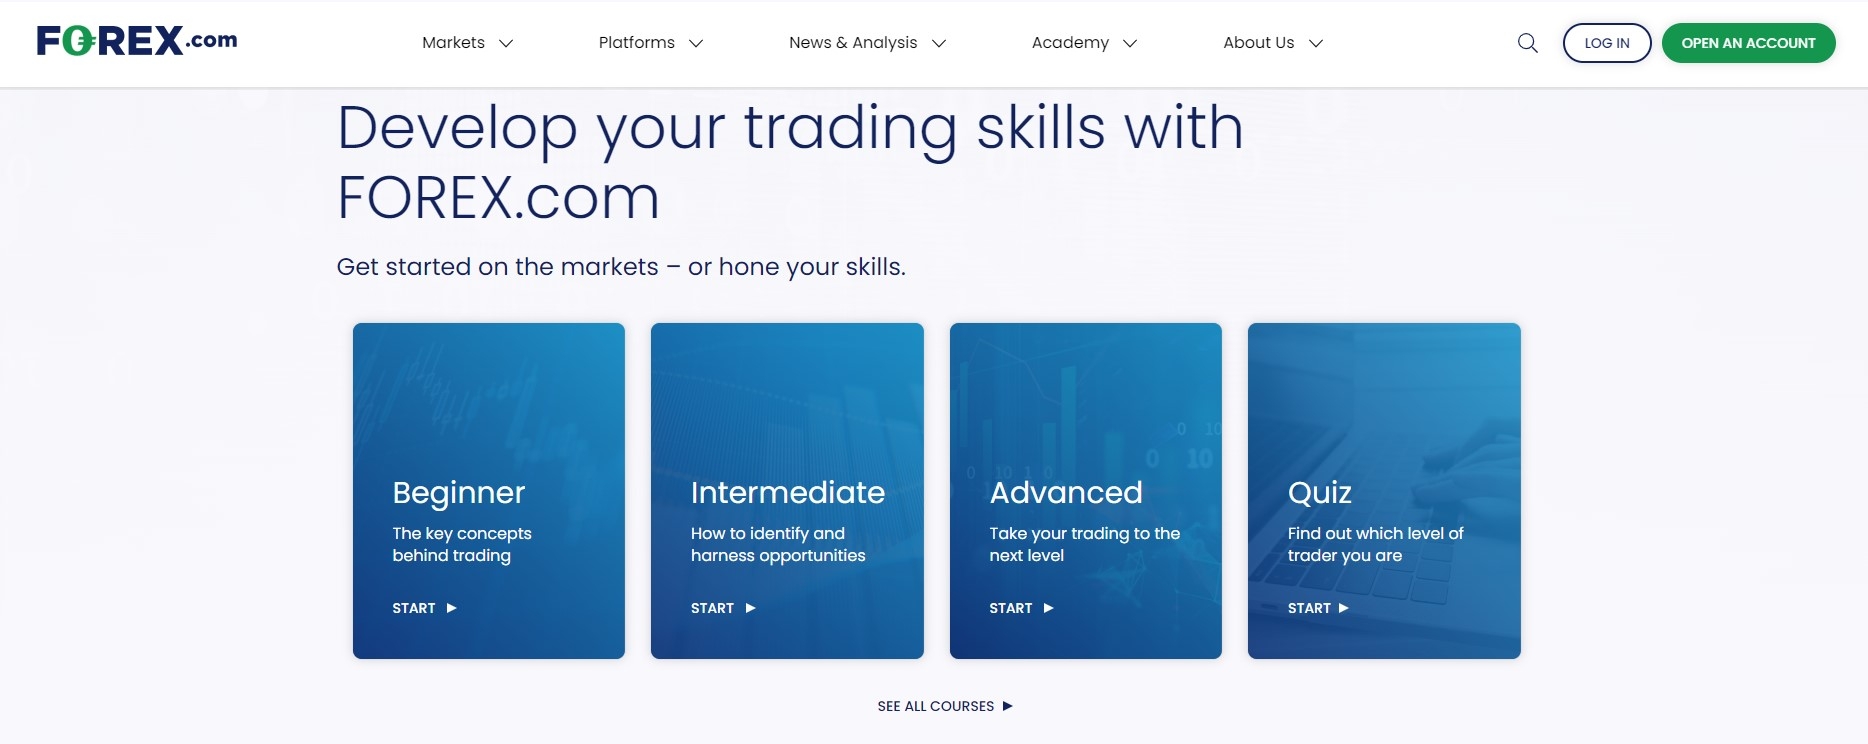 FOREX.com Learning Center